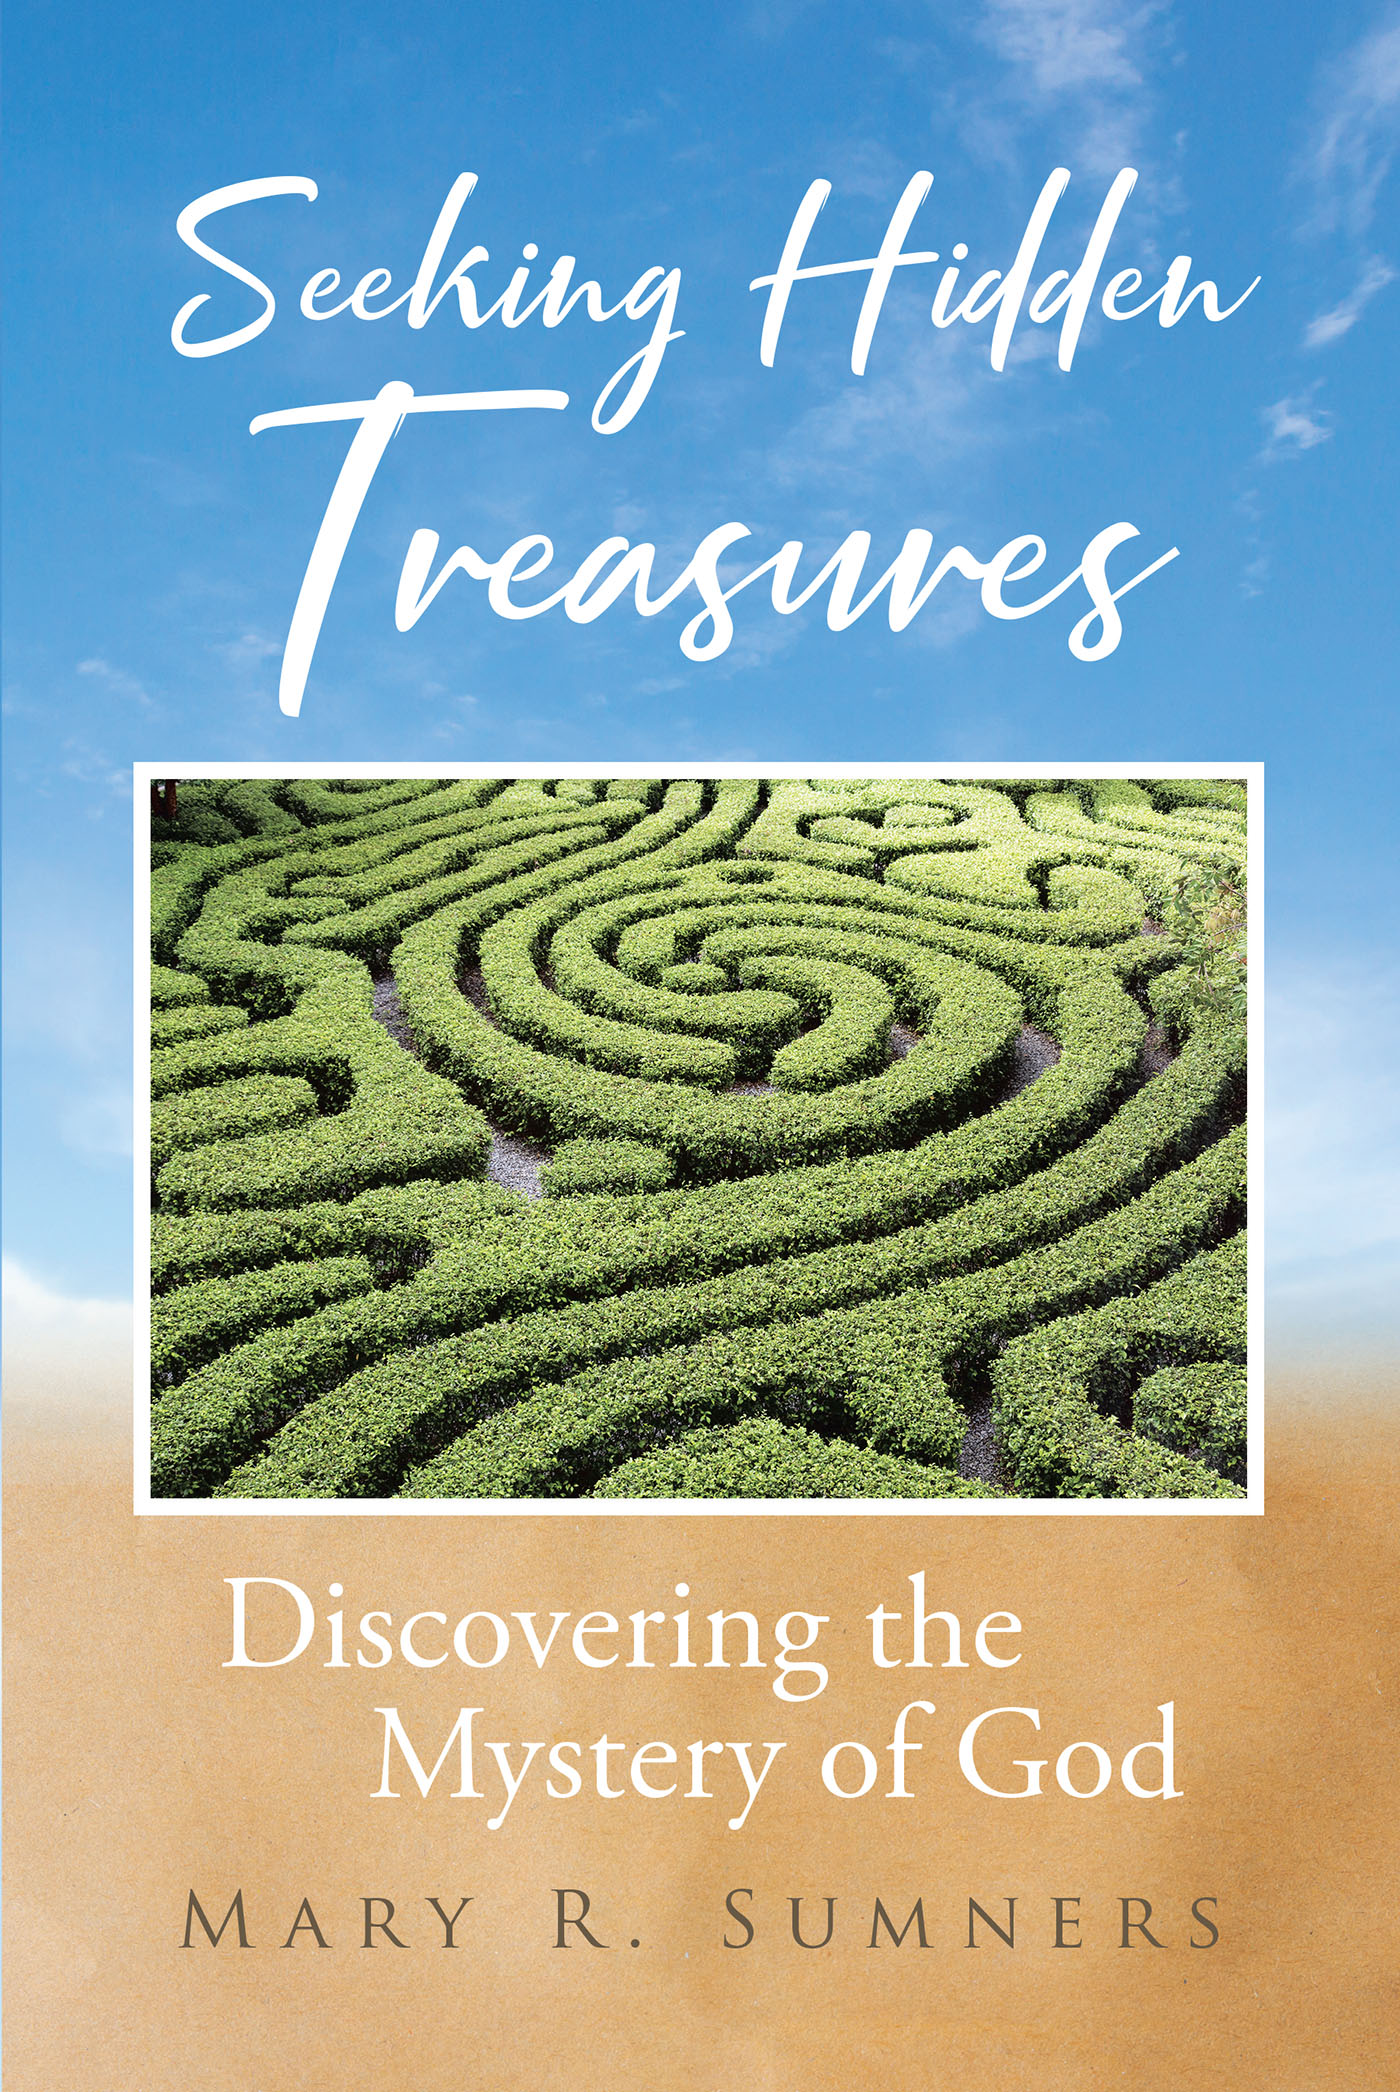 Author Mary R. Sumners’s New Book "Seeking Hidden Treasures: Discovering the Mystery of God" is a Faith-Based Journey Designed to Help Readers Better Understand the Lord